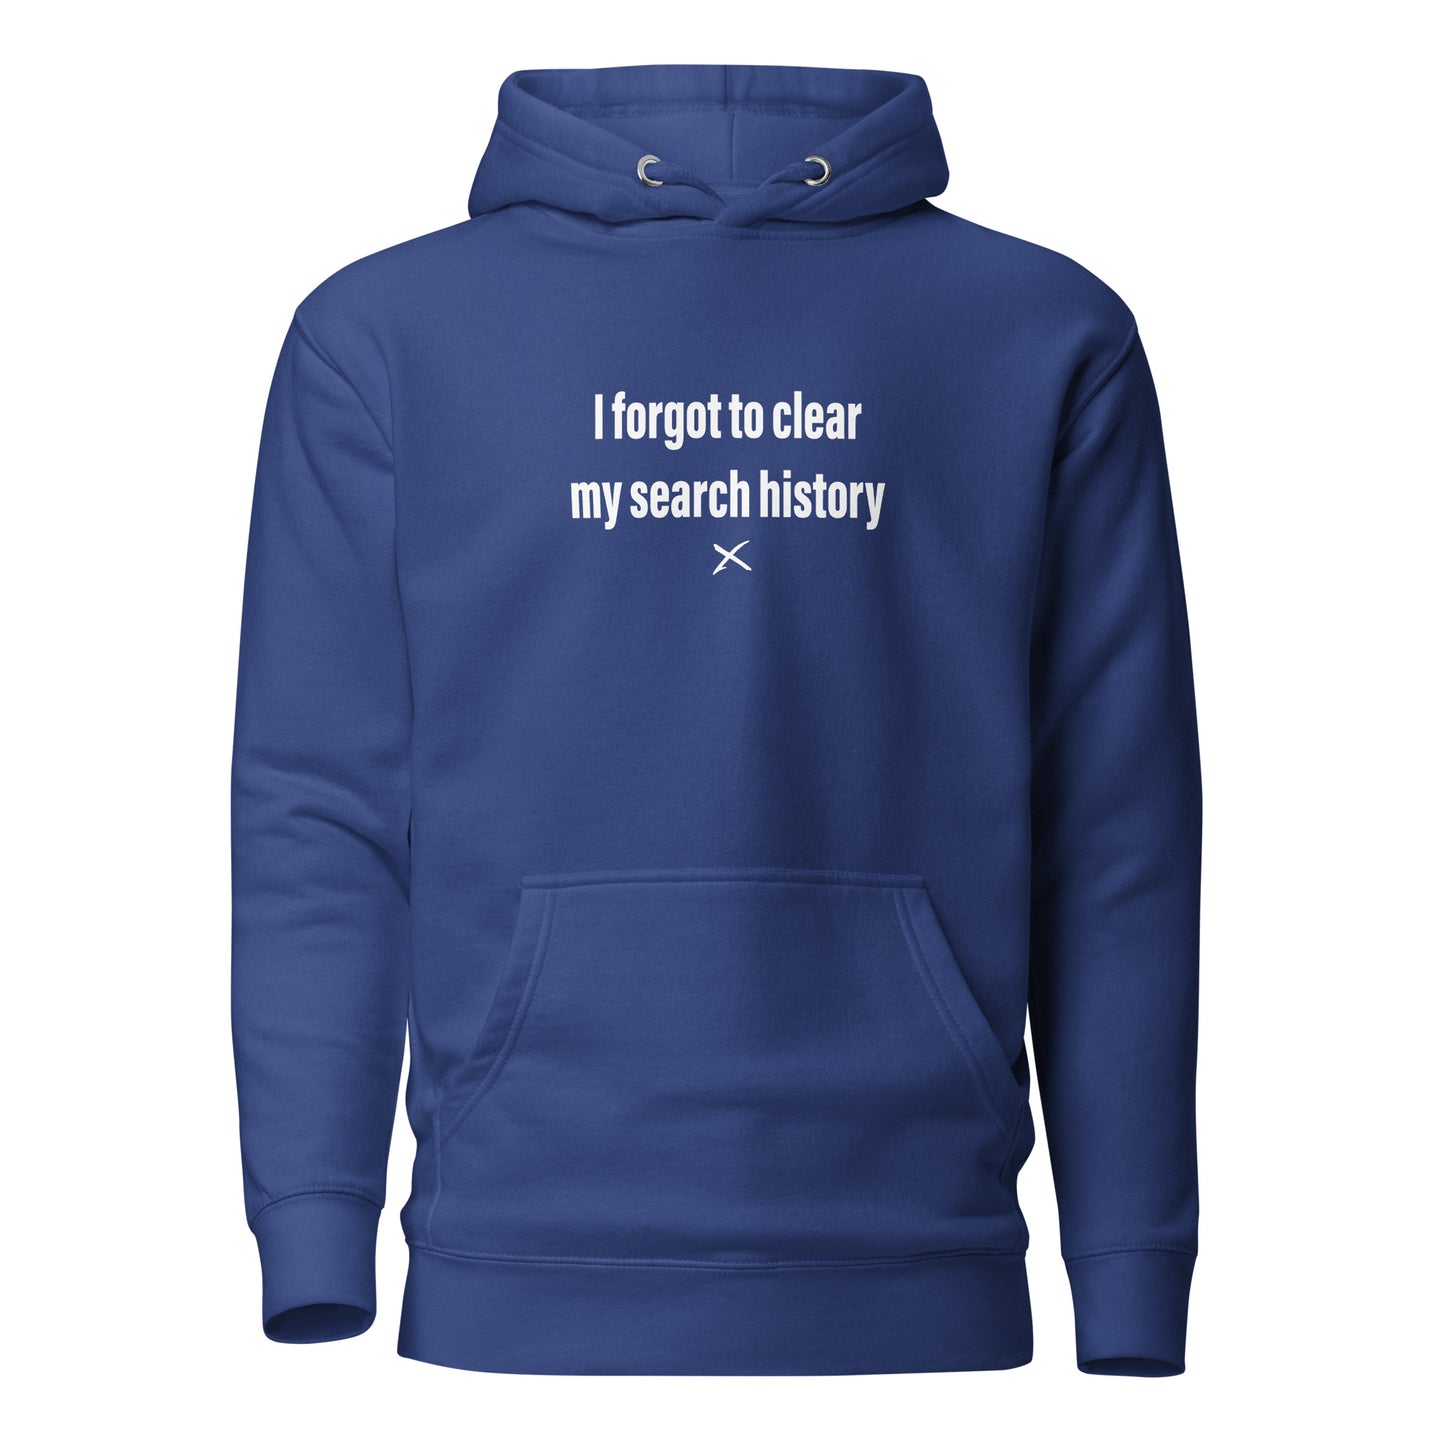 I forgot to clear my search history - Hoodie